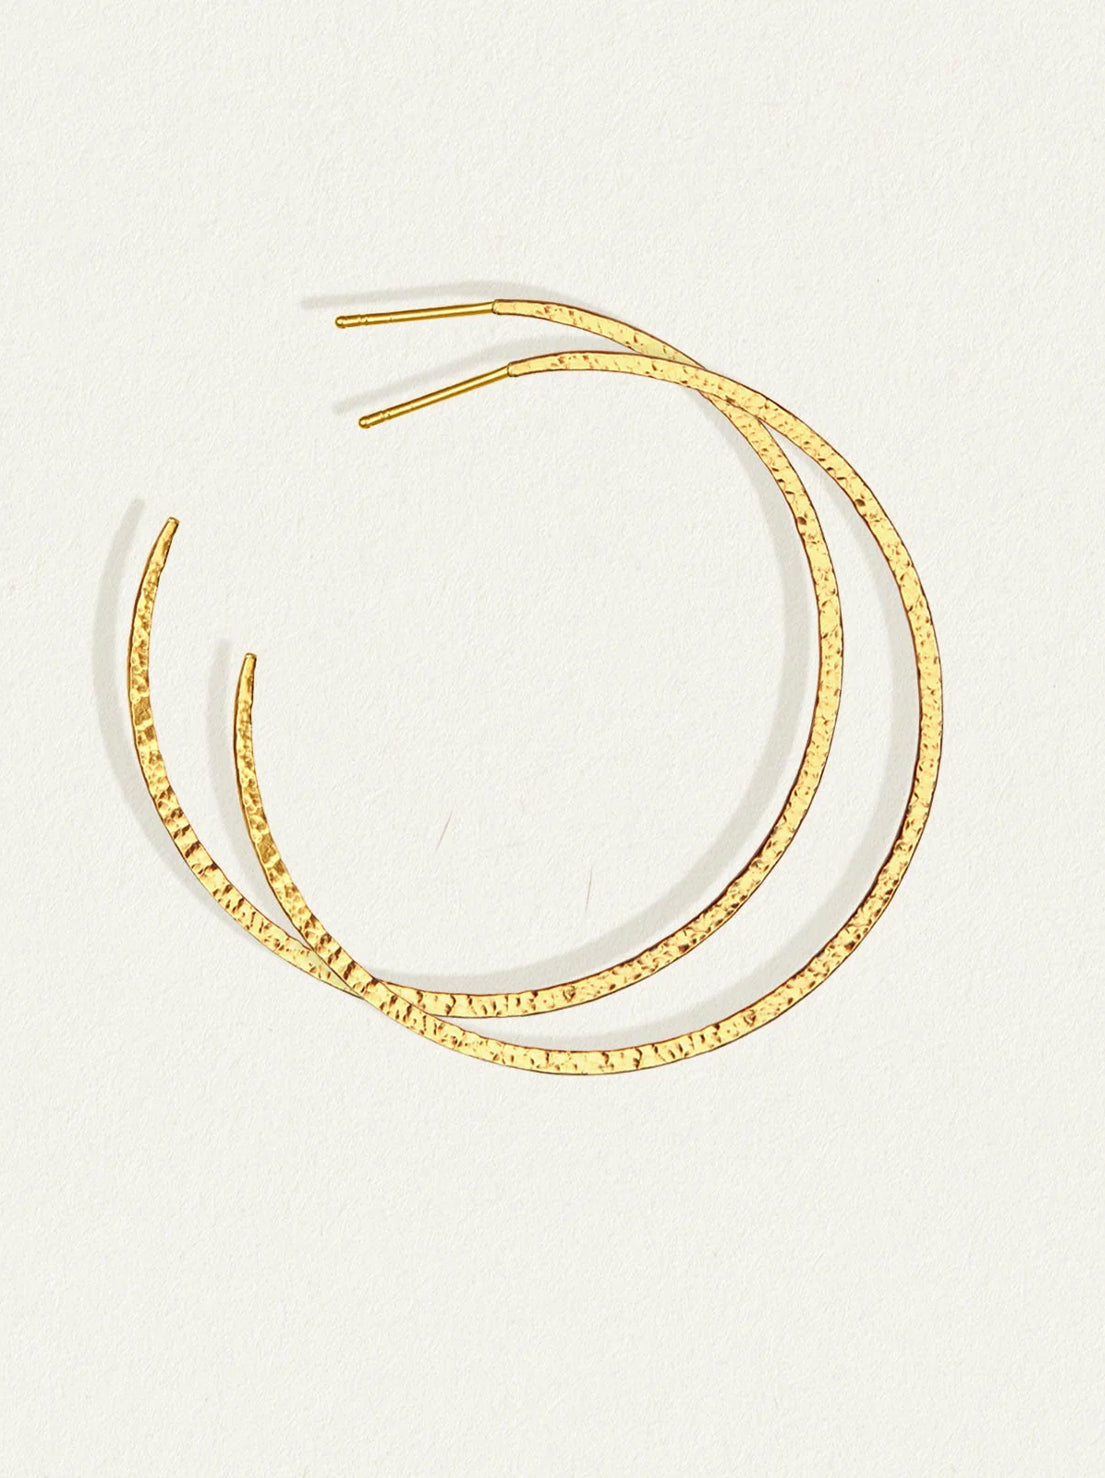 Temple of the Sun - Simple Hoop Earrings - Hammered Gold